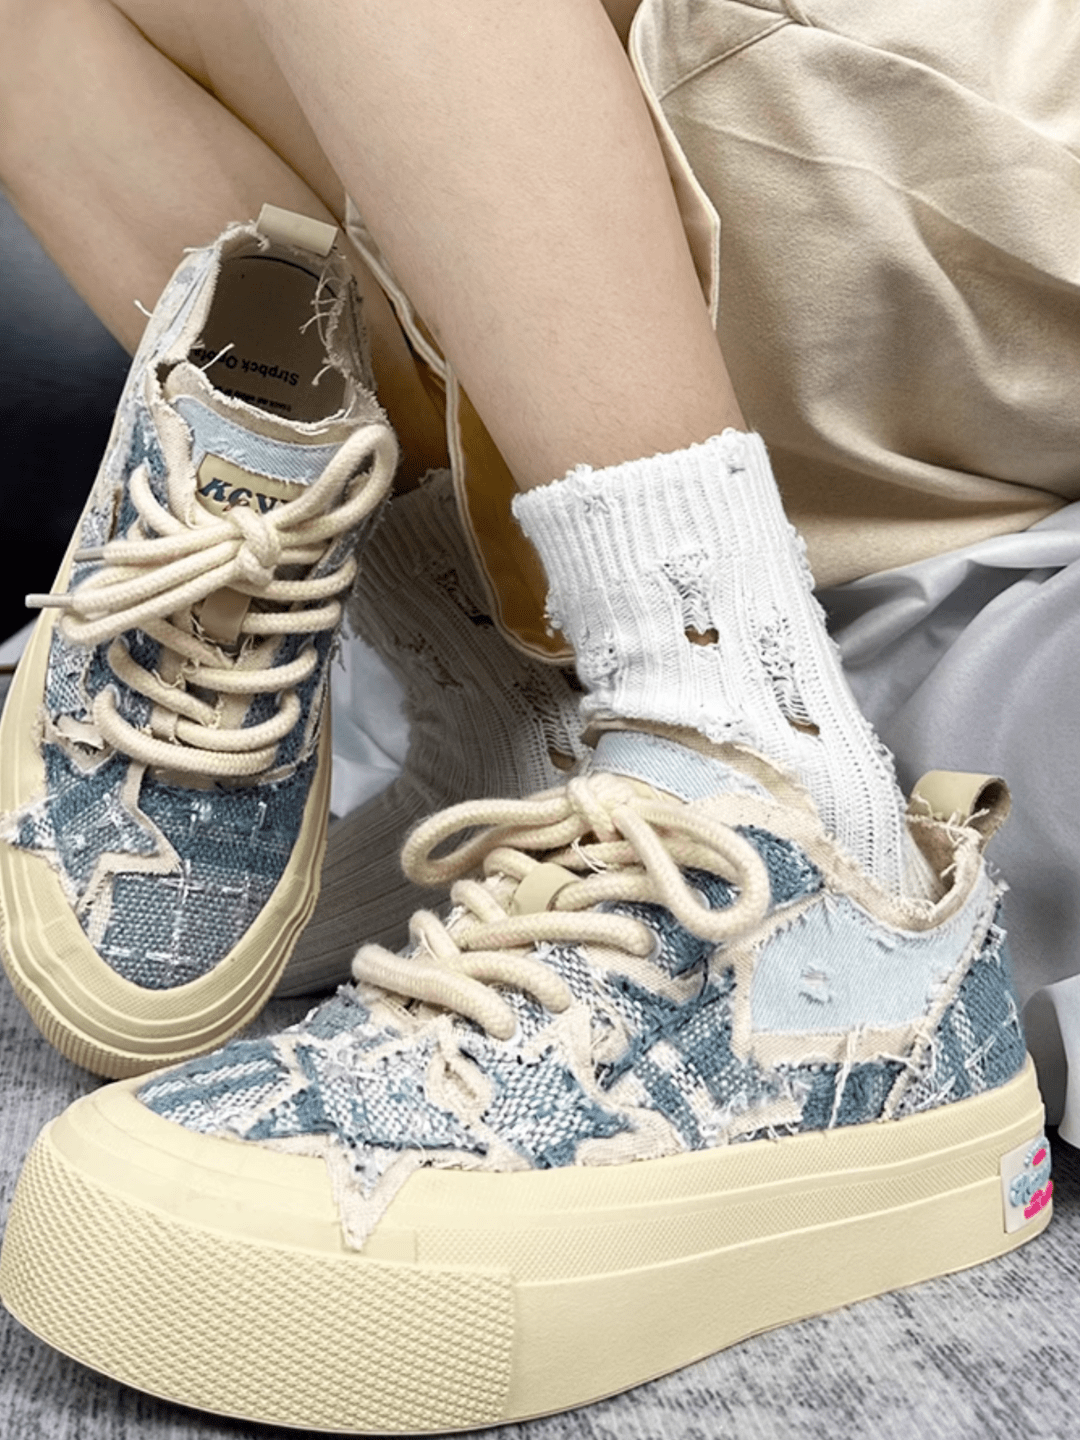 National trend niche couple star canvas shoes na631